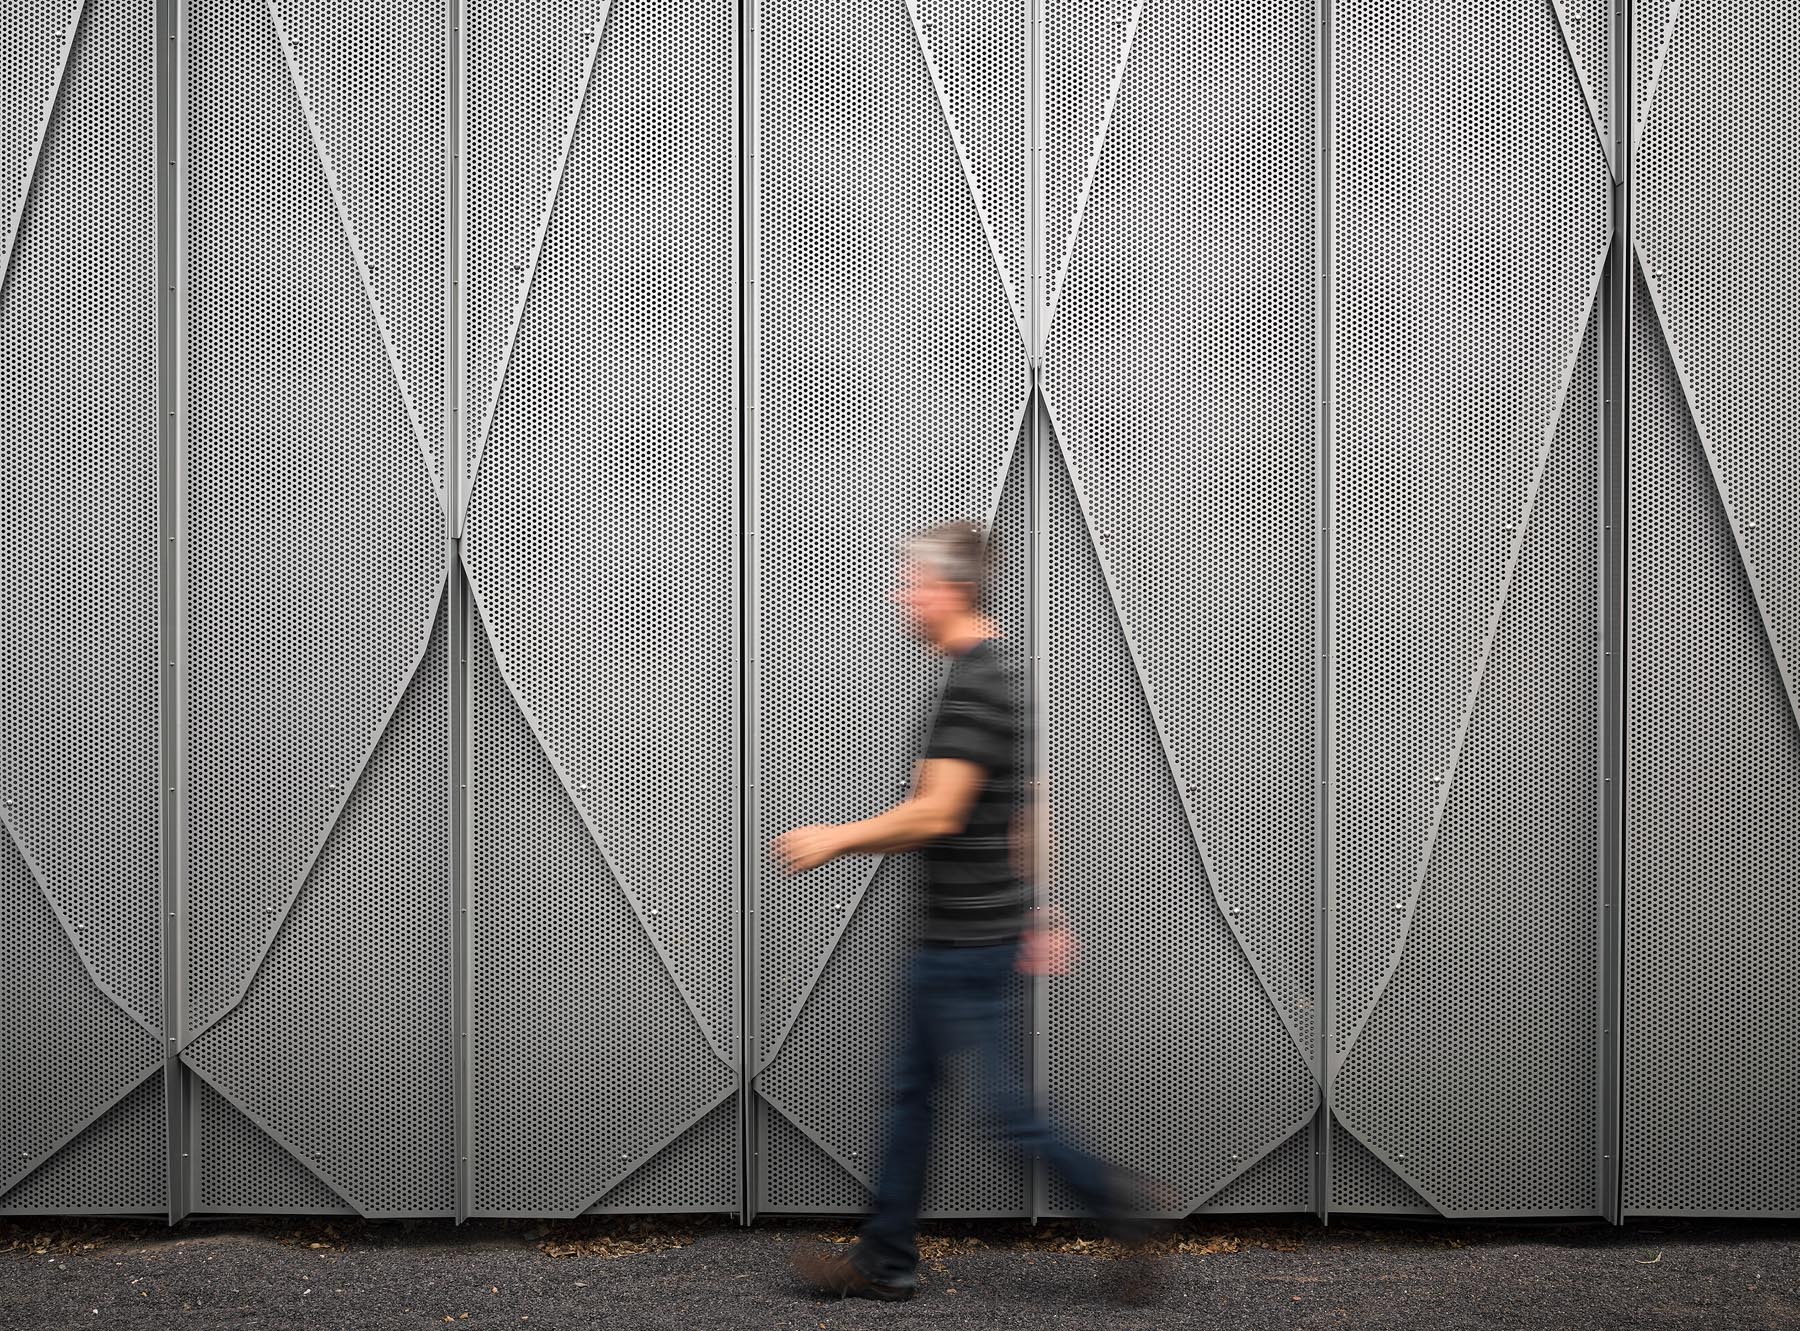 Architectural photography by Warren Diggles. SITE Santa Fe's folded, perforated aluminum exterior system. Renovation and expansion project by SHoP Architects.